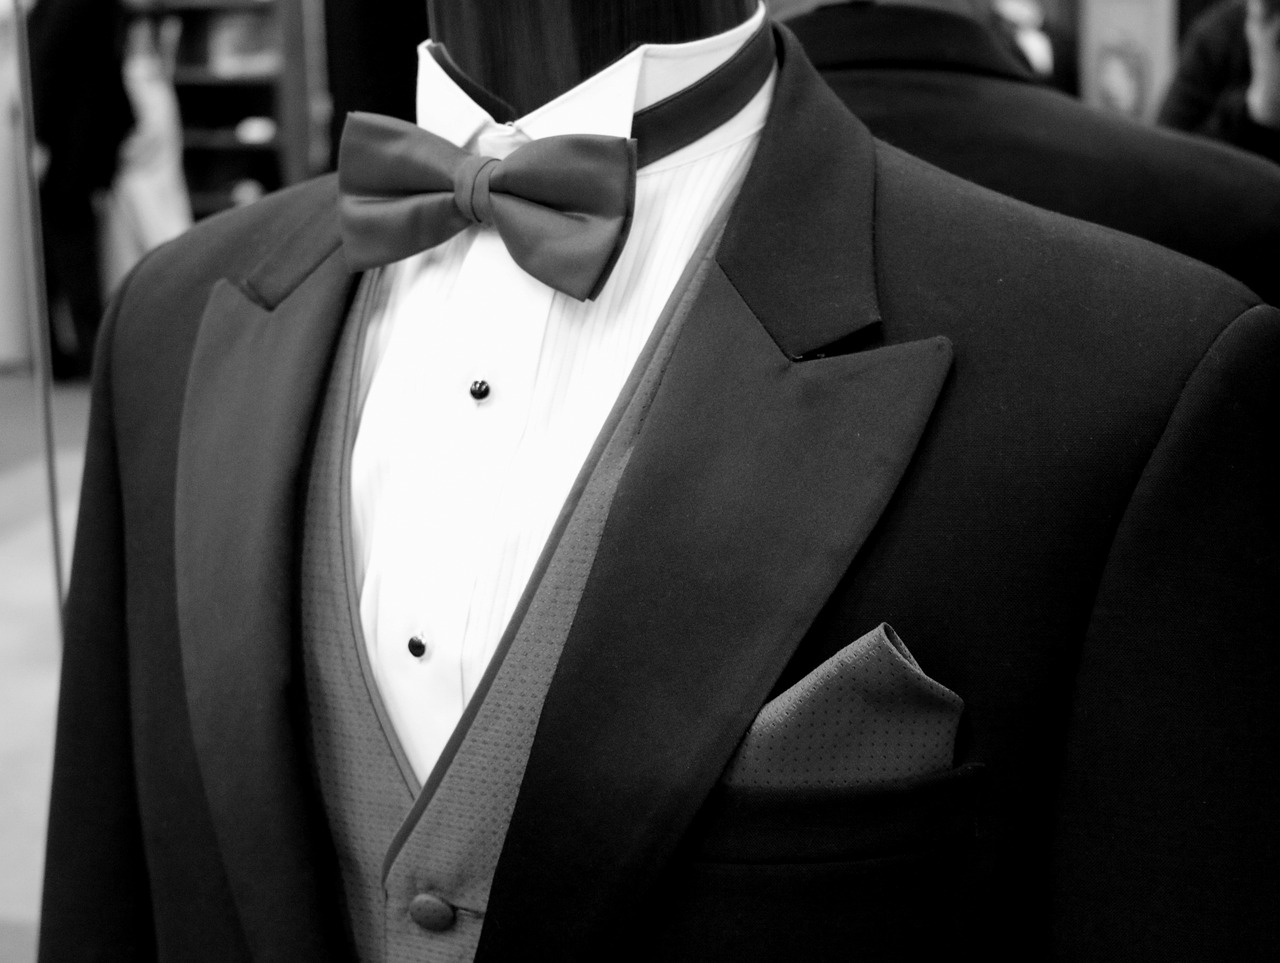 A mannequin wearing a tux.